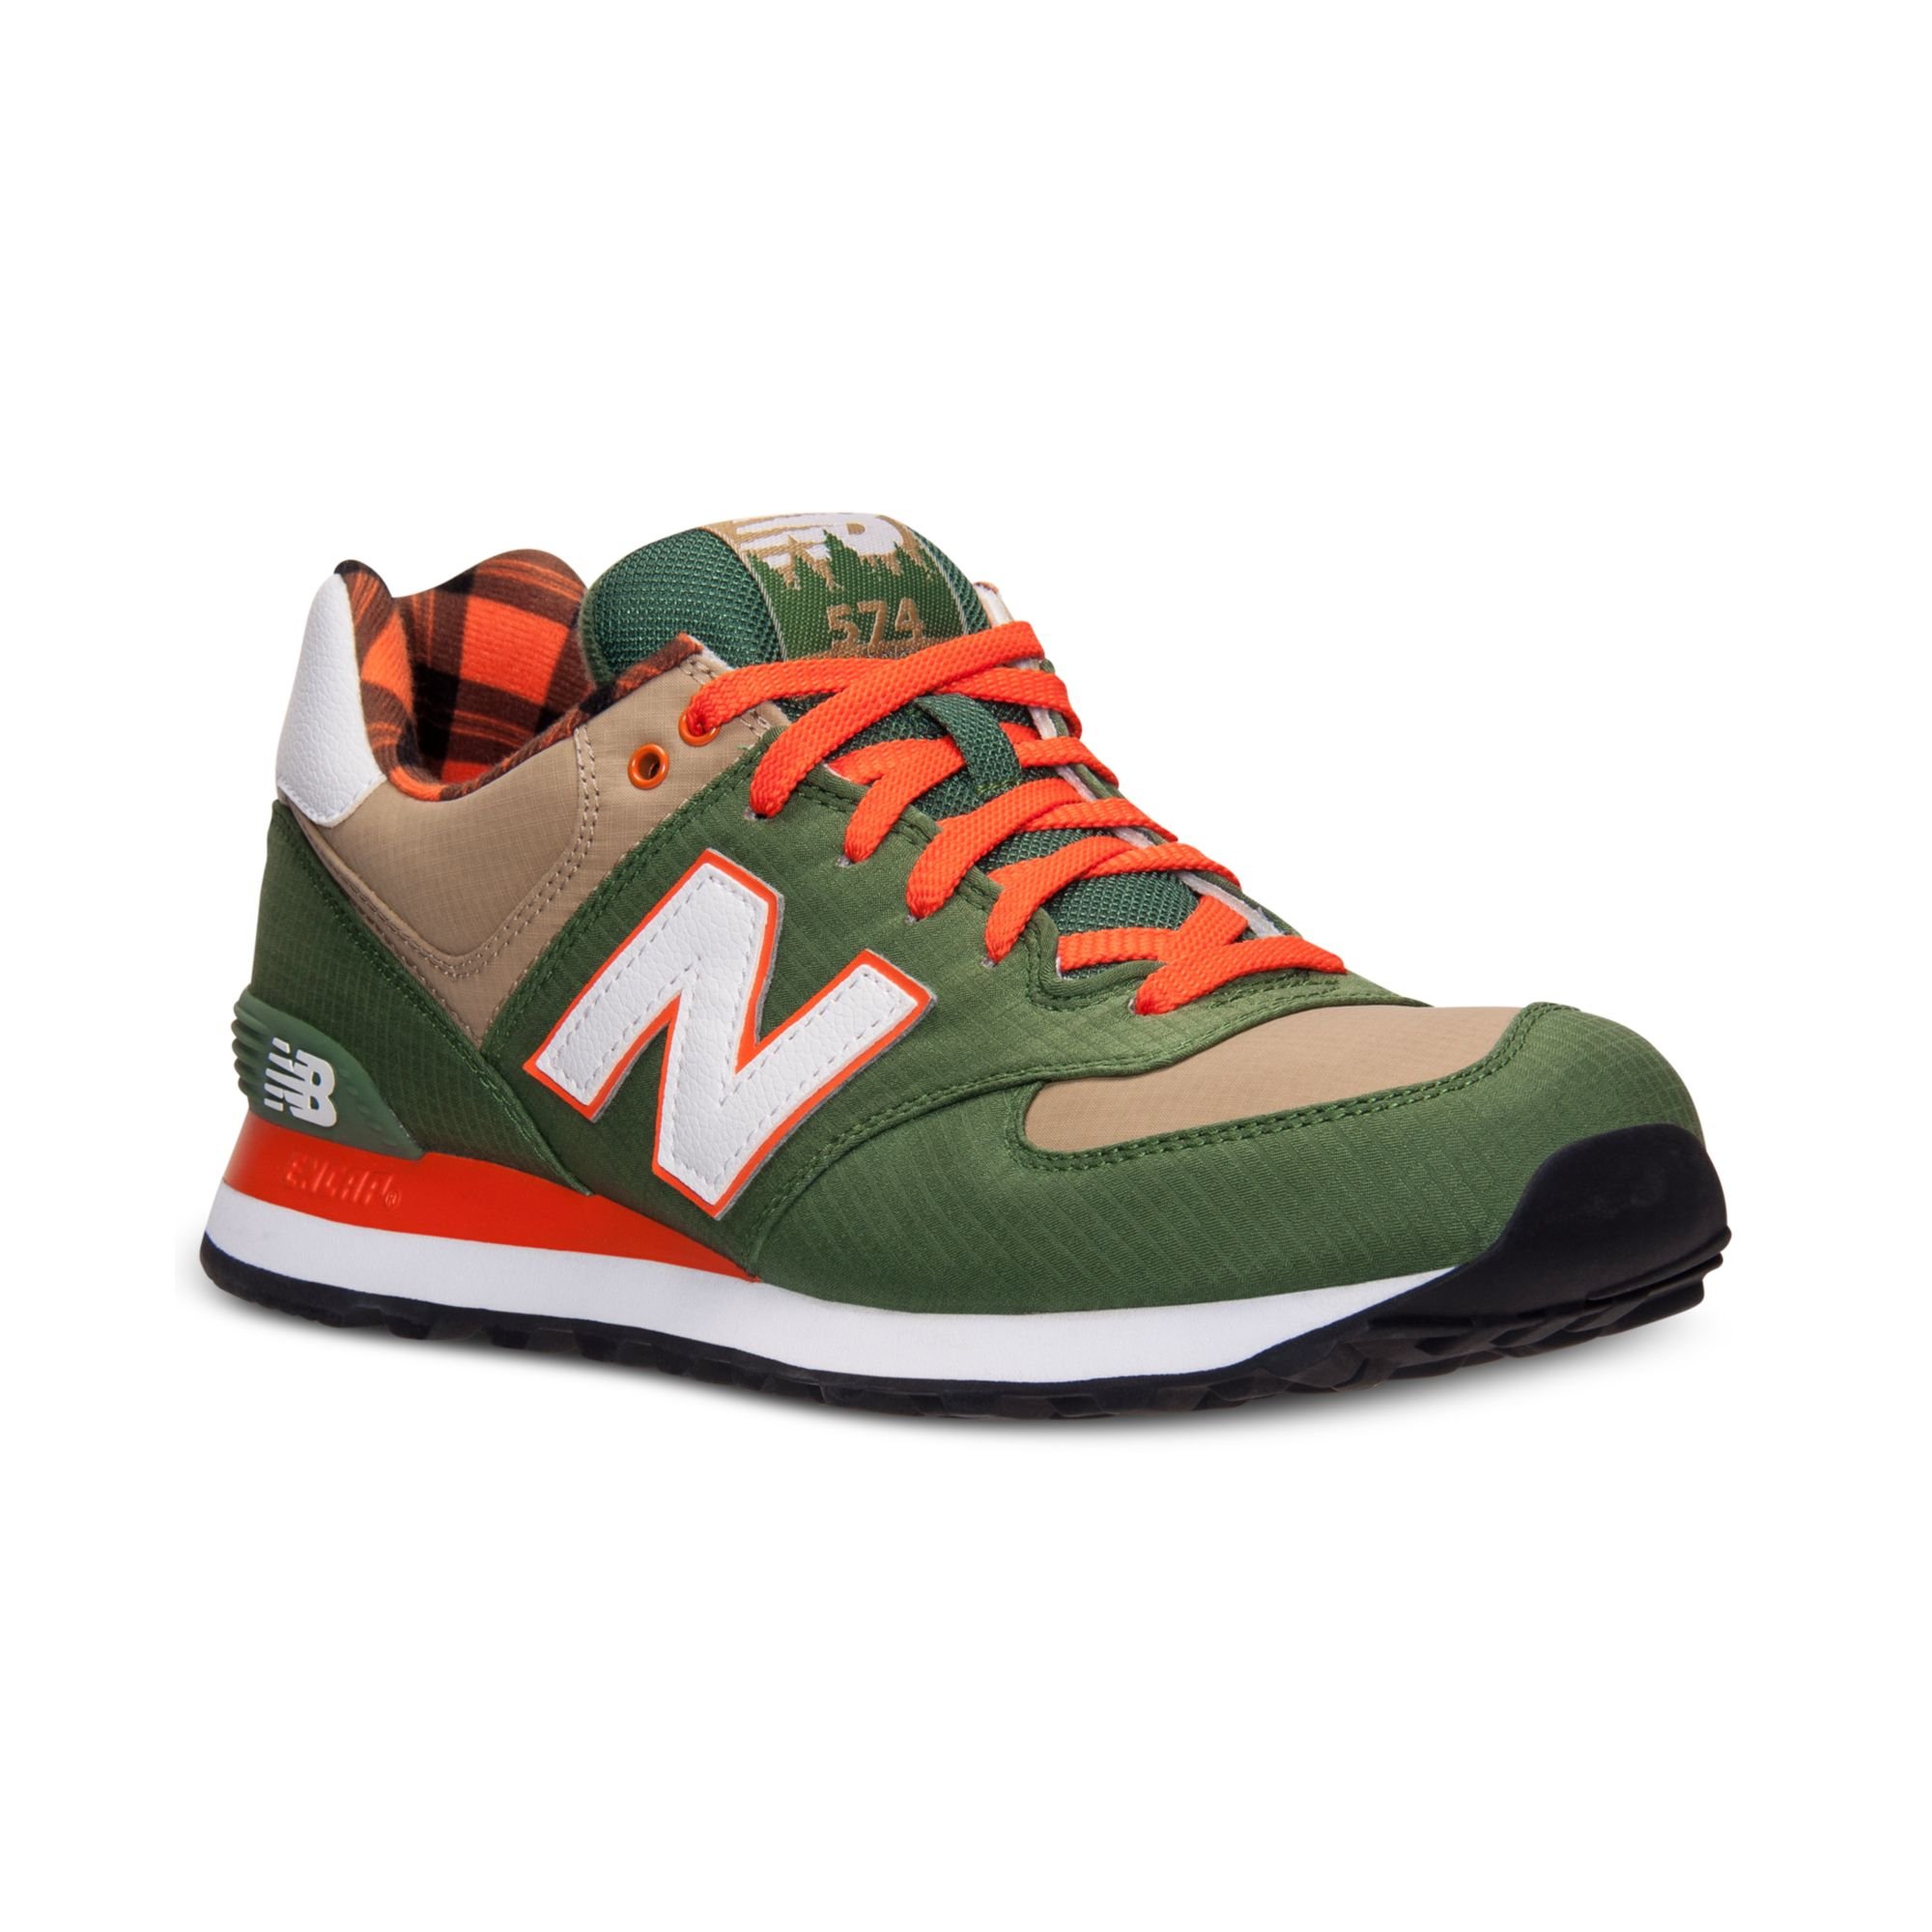 New Balance Men'S 574 Camper Casual Sneakers From Finish Line in ...